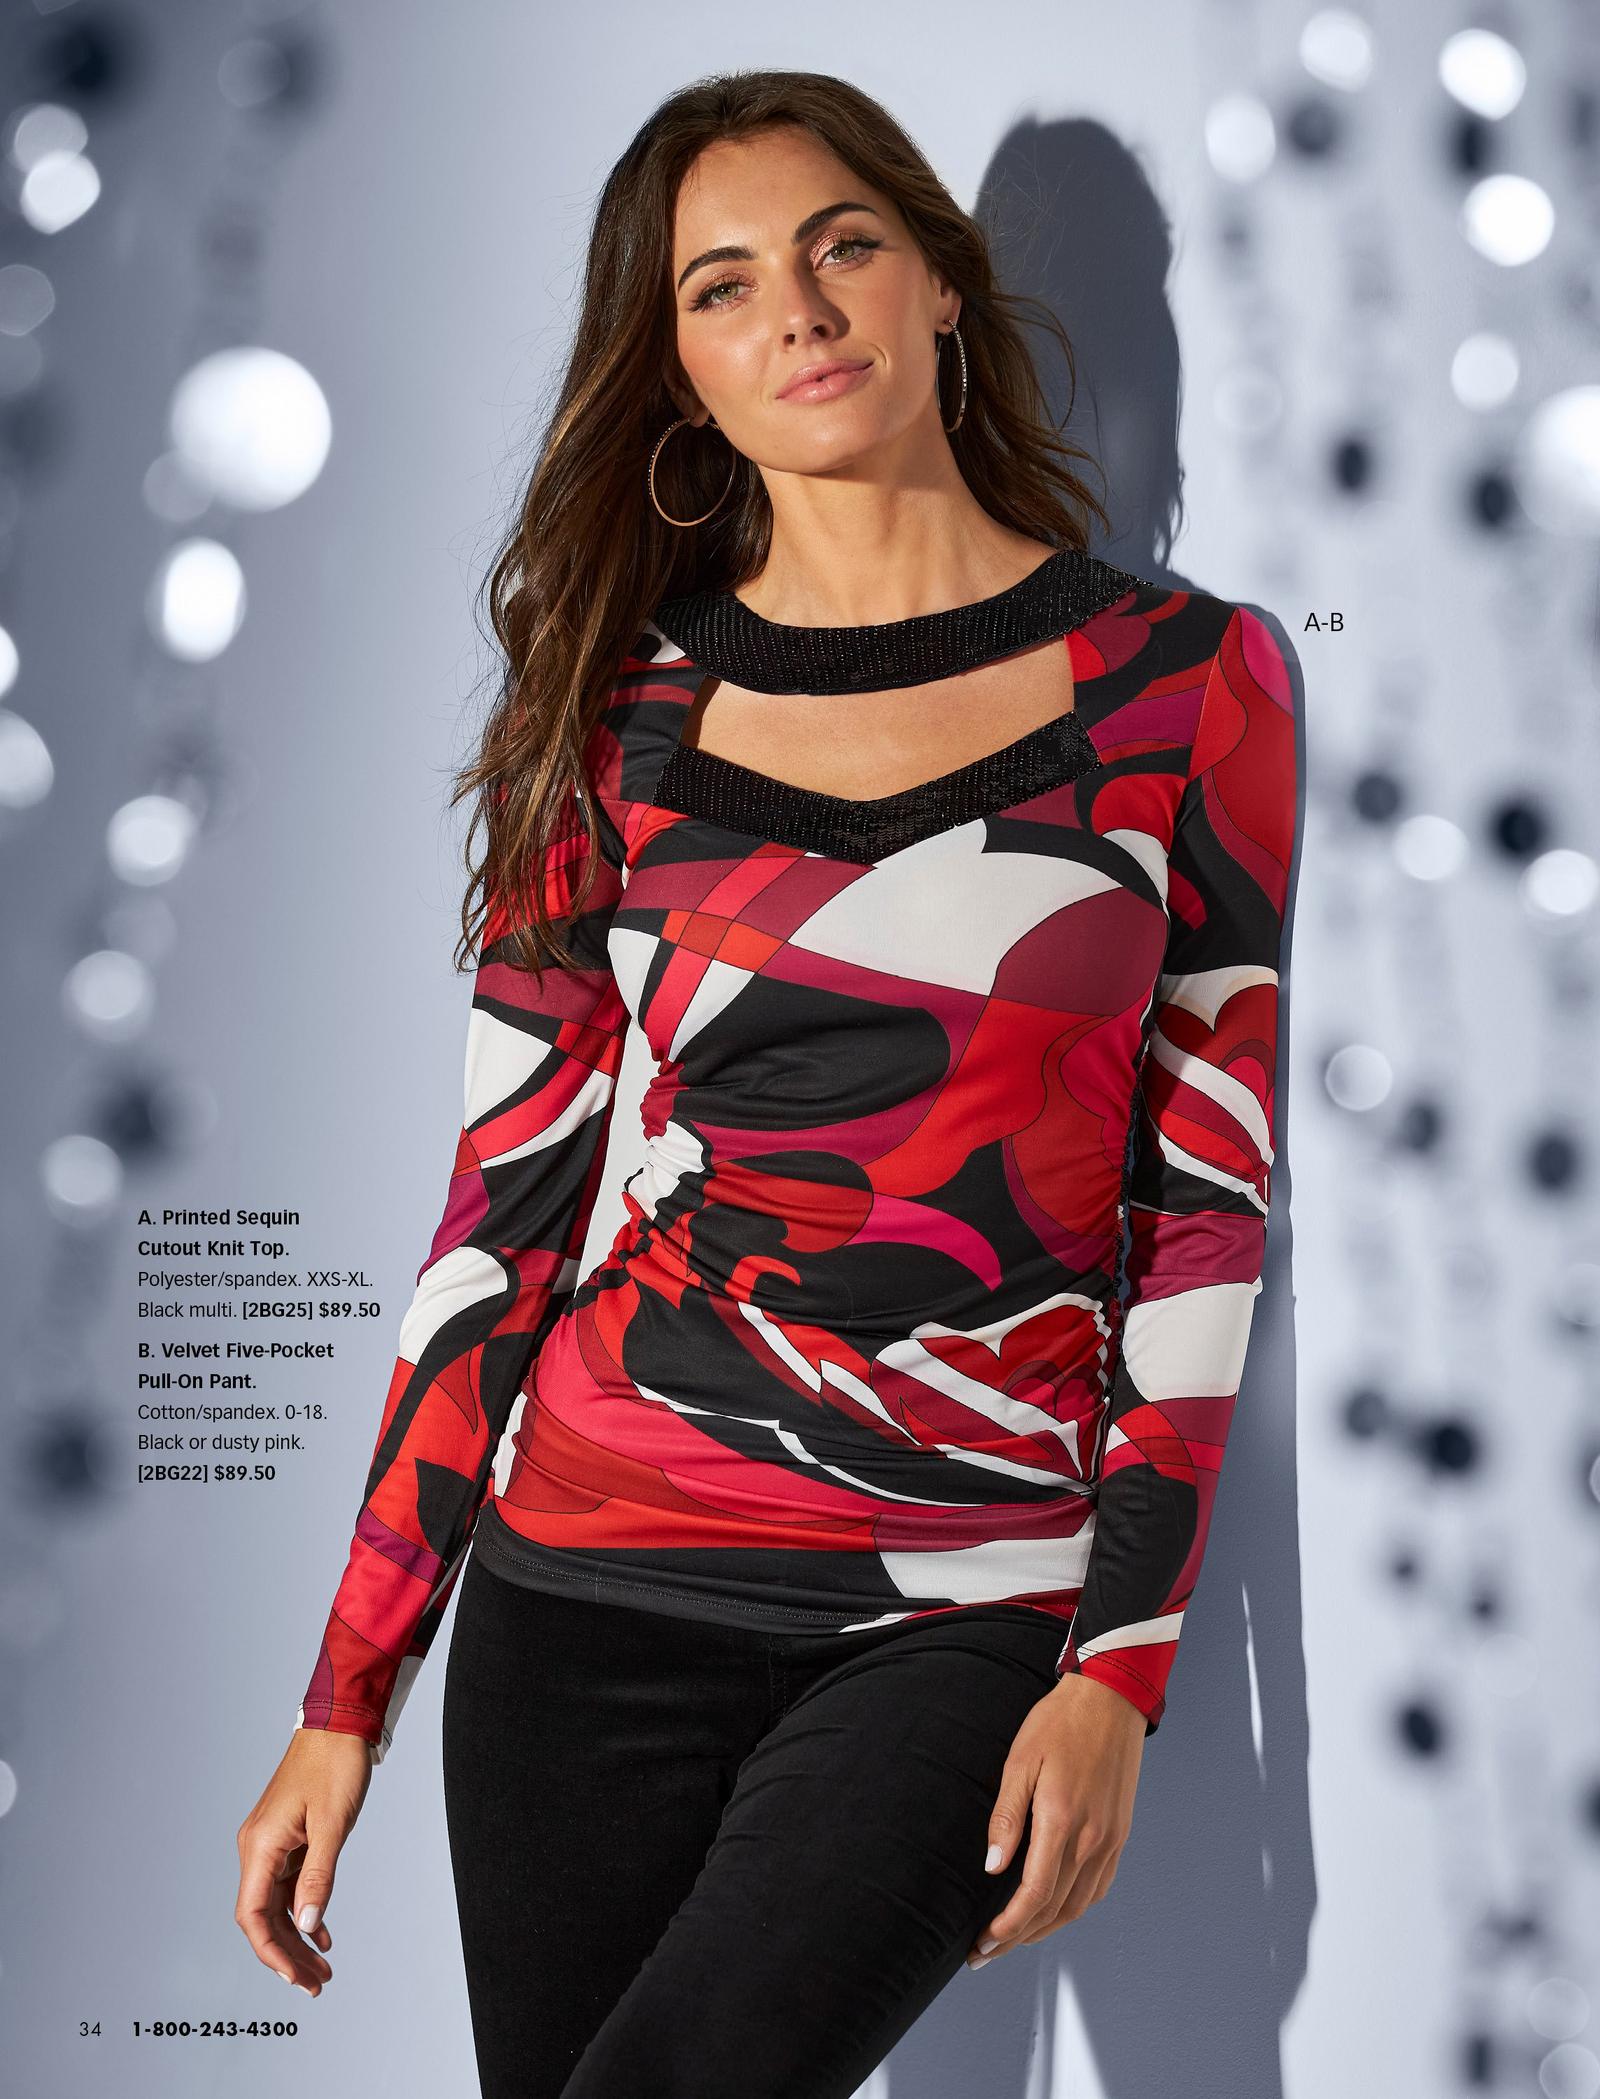 model wearing a red, white, and black cutout sequin embellished long-sleeve top and black velvet pants.